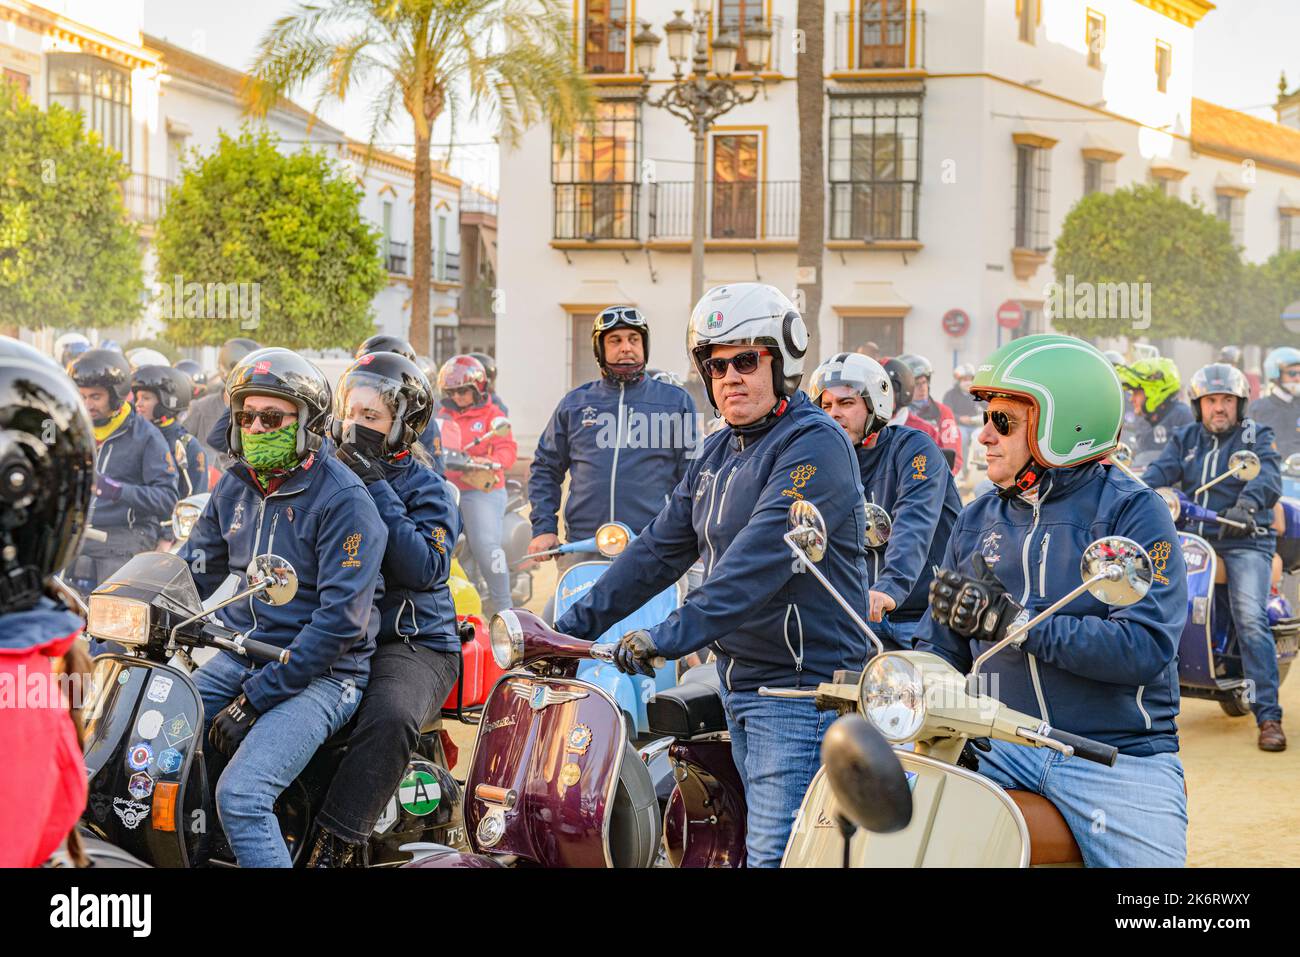 Arahal, Seville.Spain. October 15, 2022. In October, 'El Avispero' (The Wasp's Nest) is held in Arahal (Seville). A meeting of Vespa scooter enthusias Stock Photo